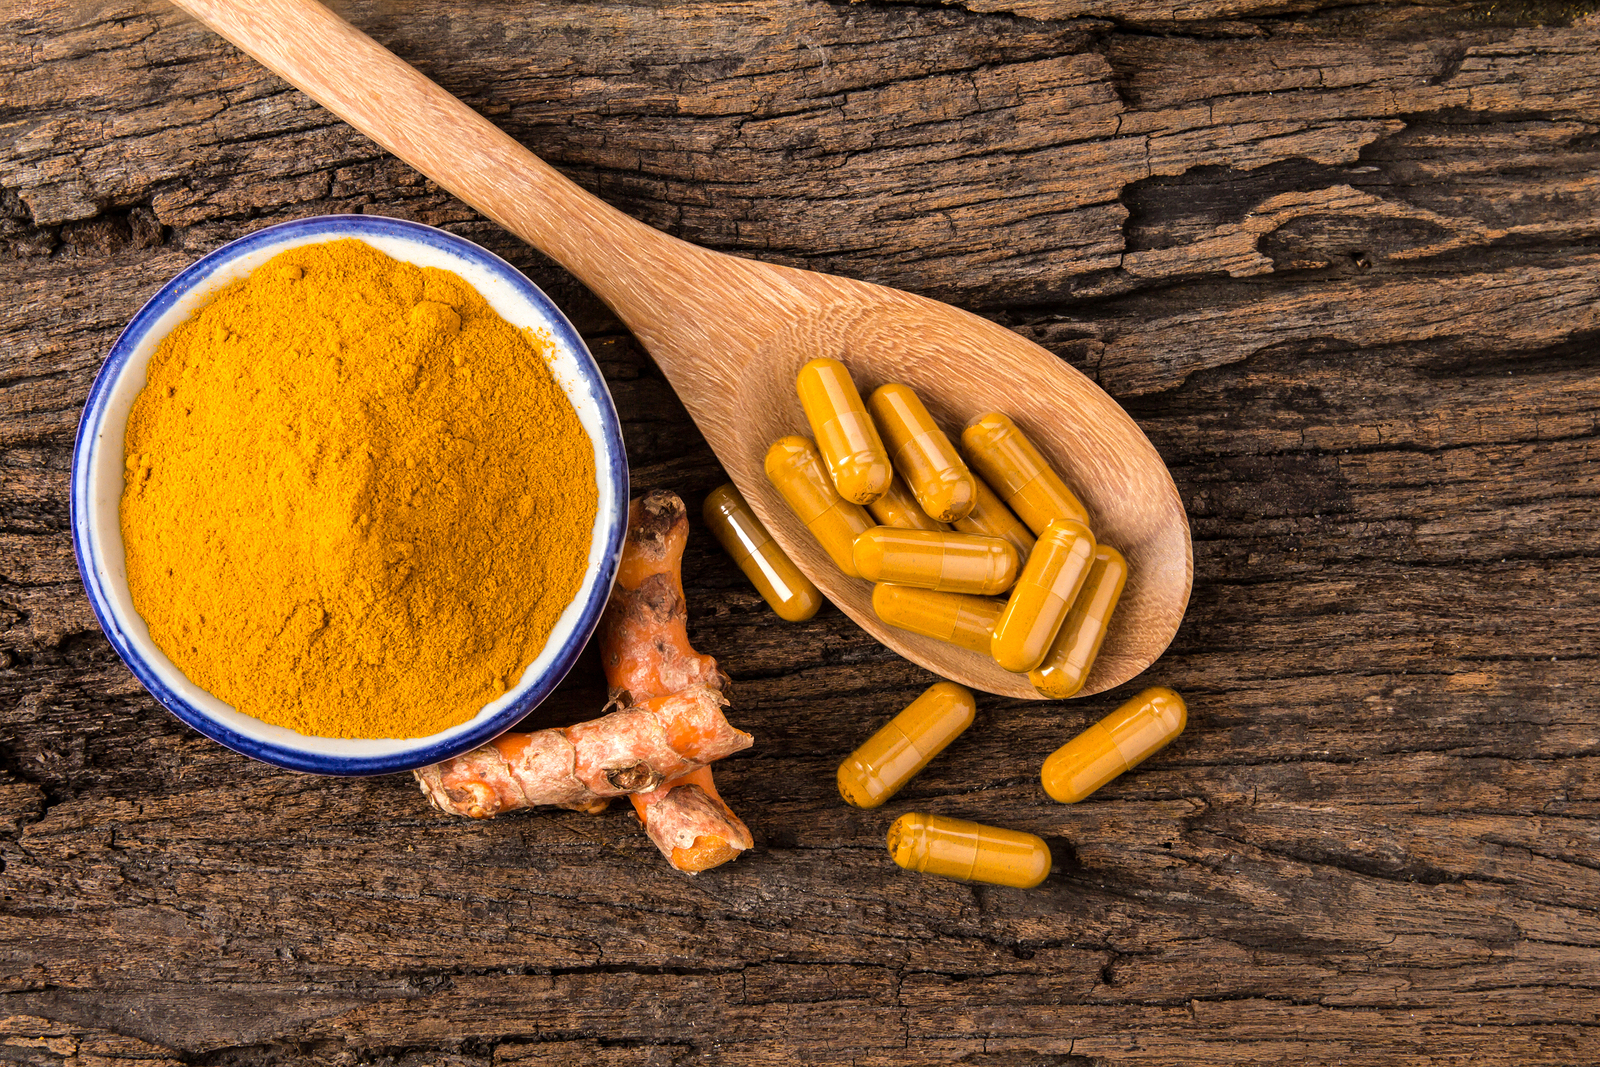 Curcumin Composite Could Help Relieve Arthritis, According to Study